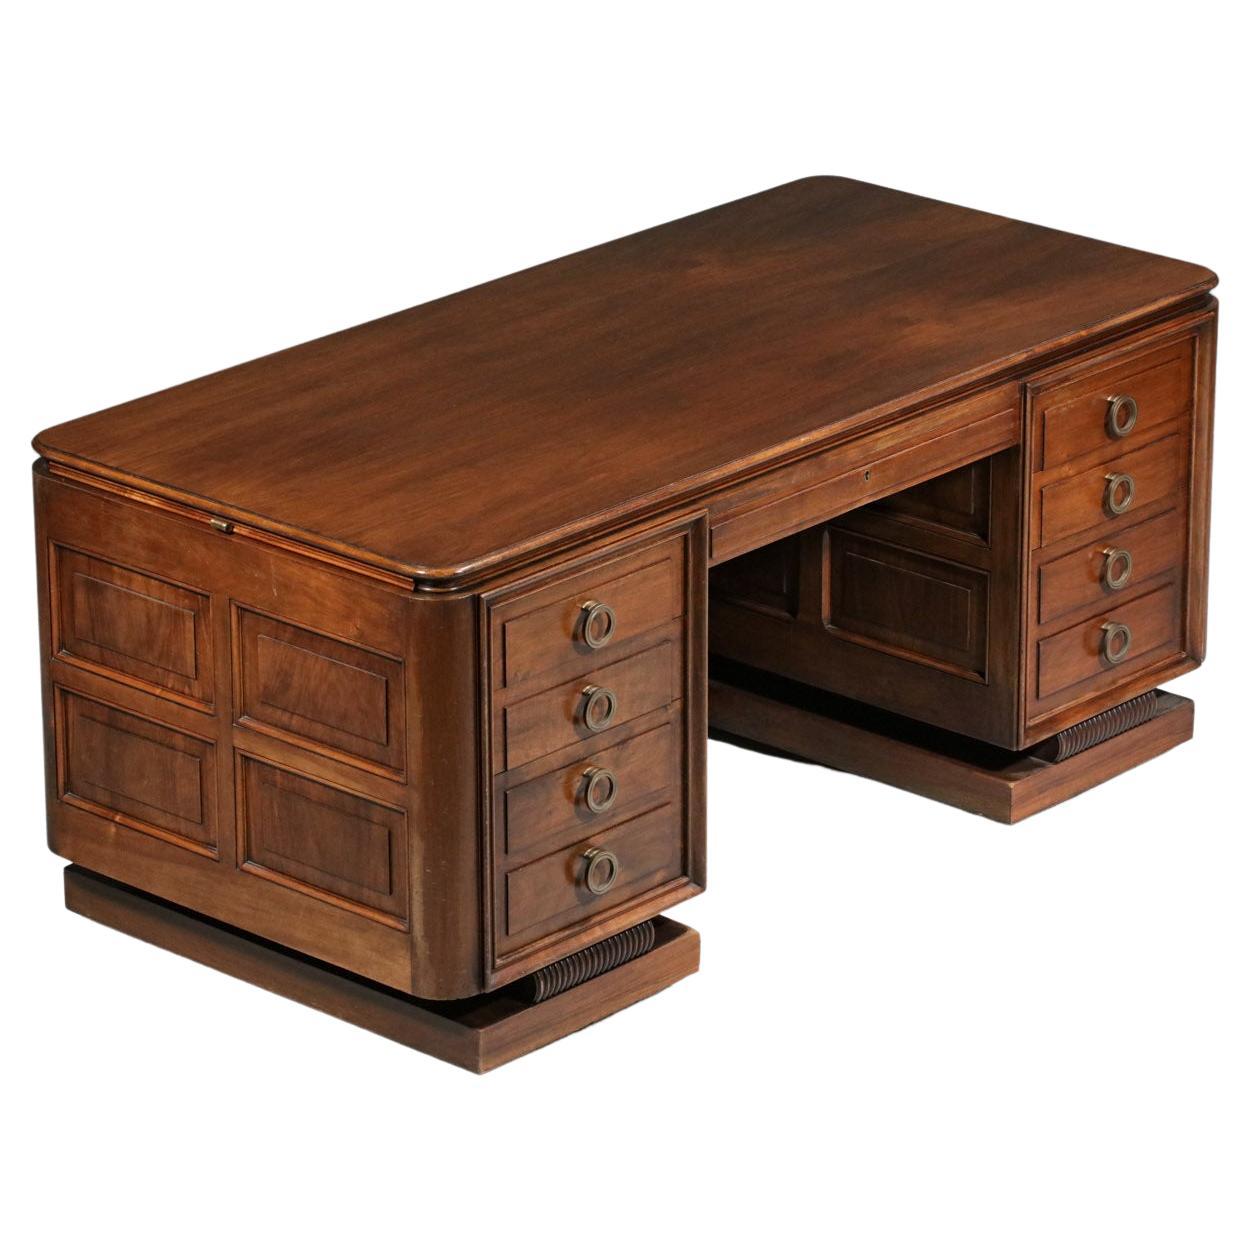 Imposing art deco desk from the 50's in the taste of André Arbus's work. Structure in solid oak and veneer, brass handles. Very nice work of wood on the whole desk which takes the same design as the base. It is composed of four side drawers, a